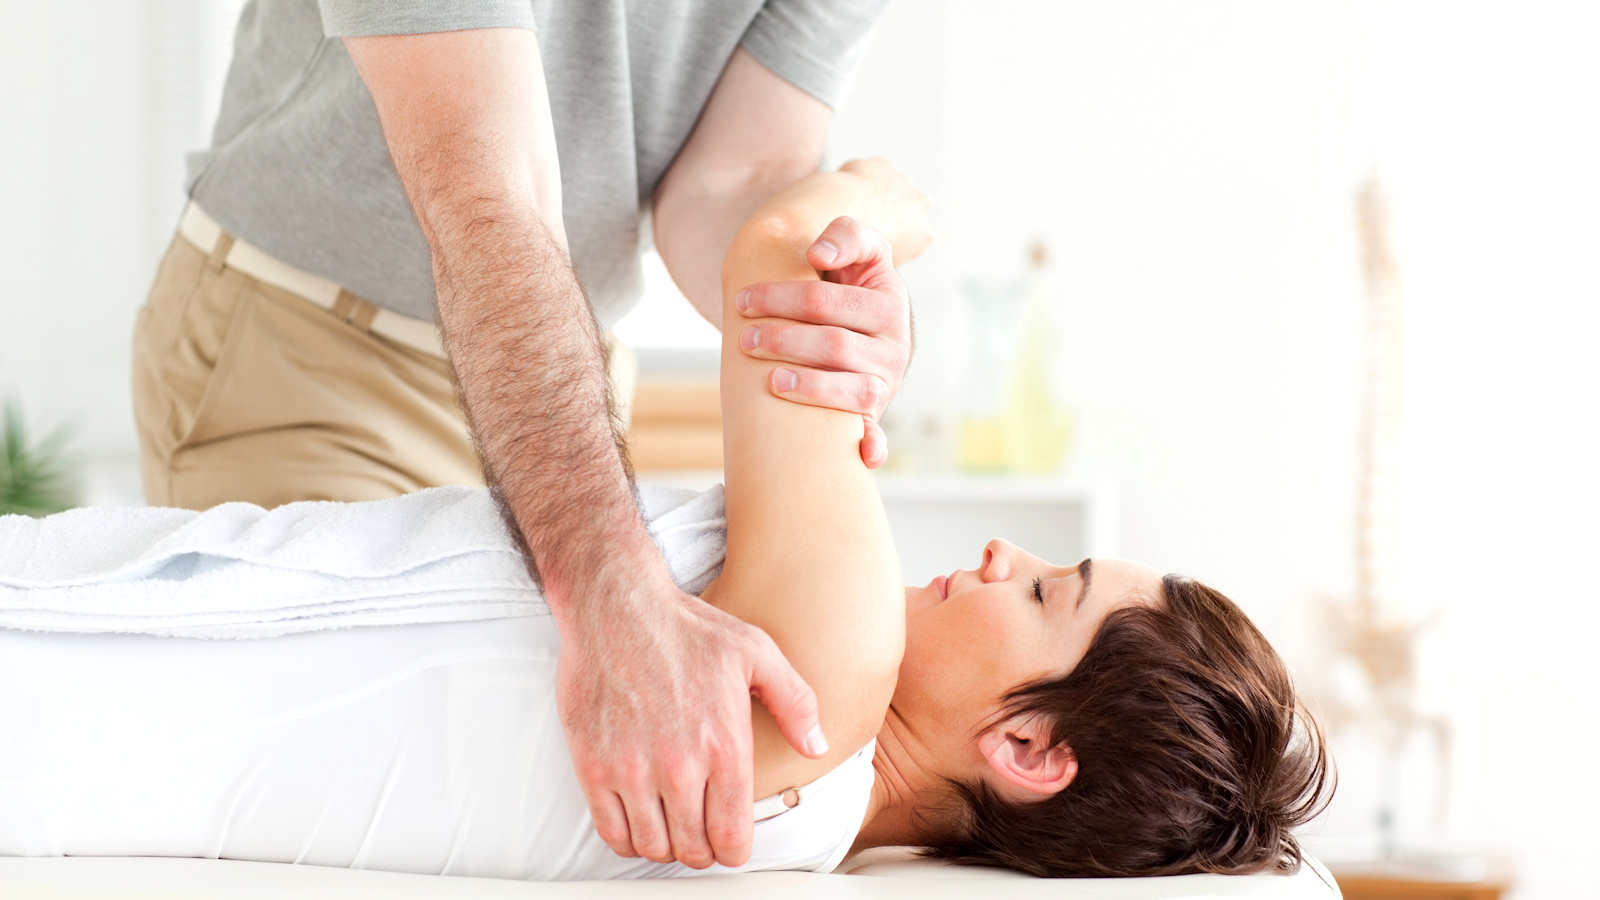 Sonnier Chiropractic Clinic of Baton Rouge